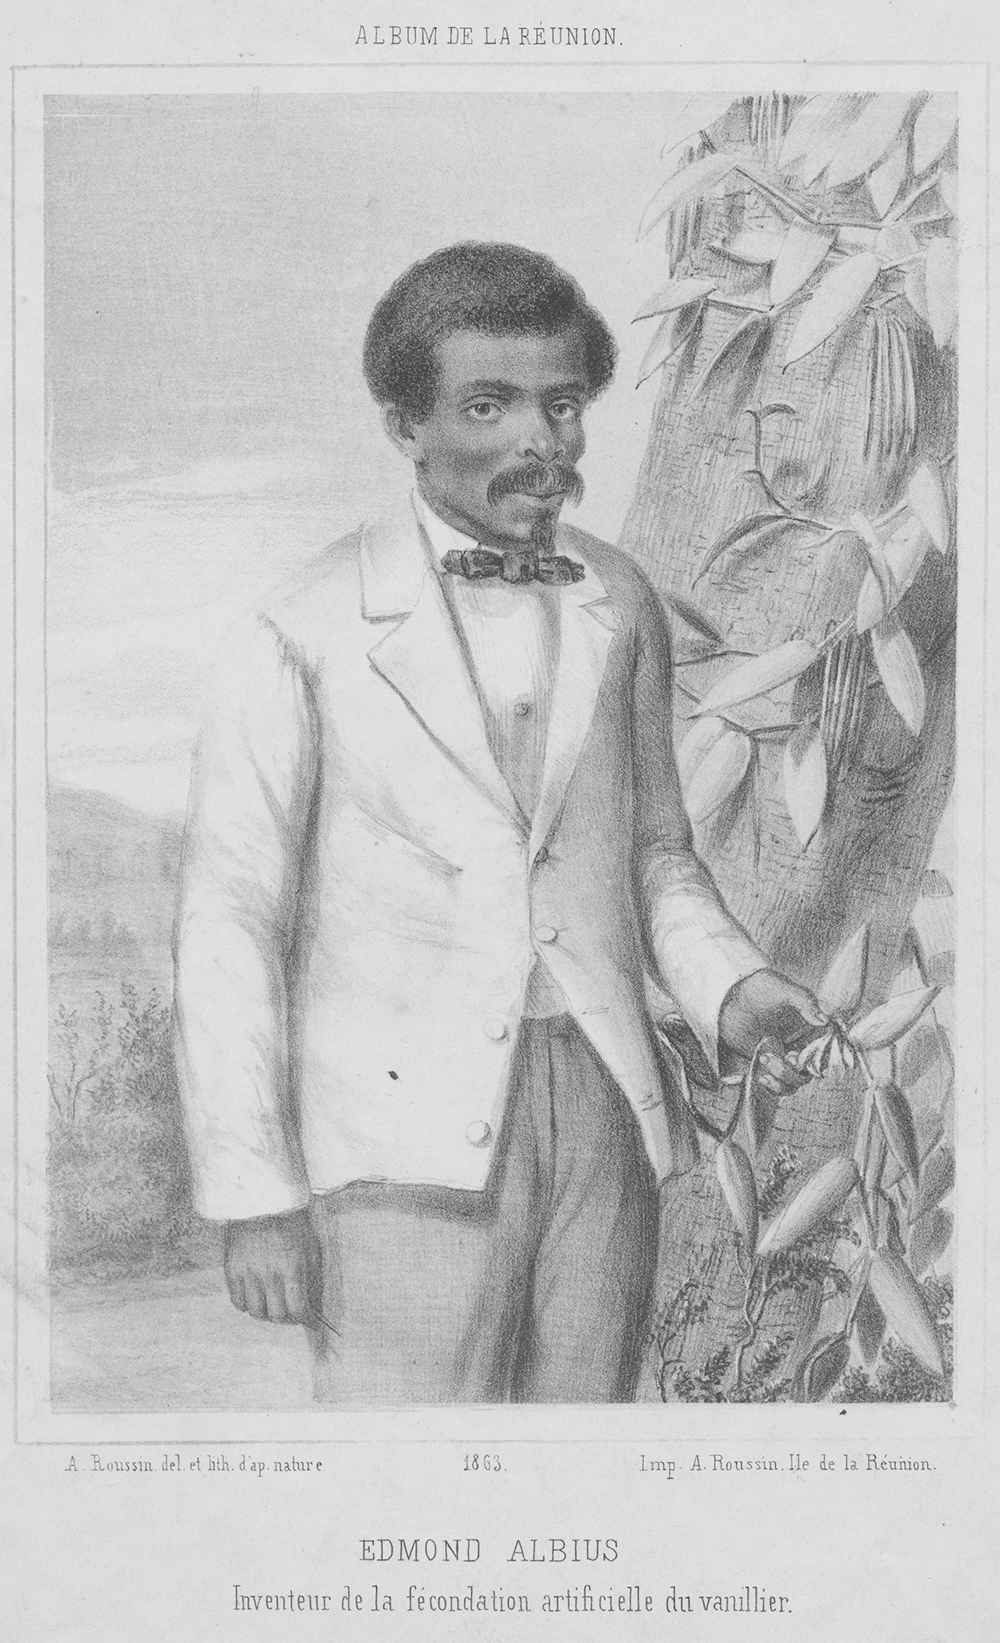 Edmond Albius, by Antoine Roussin, 1863. Schomburg Center for Research in Black Culture, Photographs and Prints Division, The New York Public Library Digital Collections.